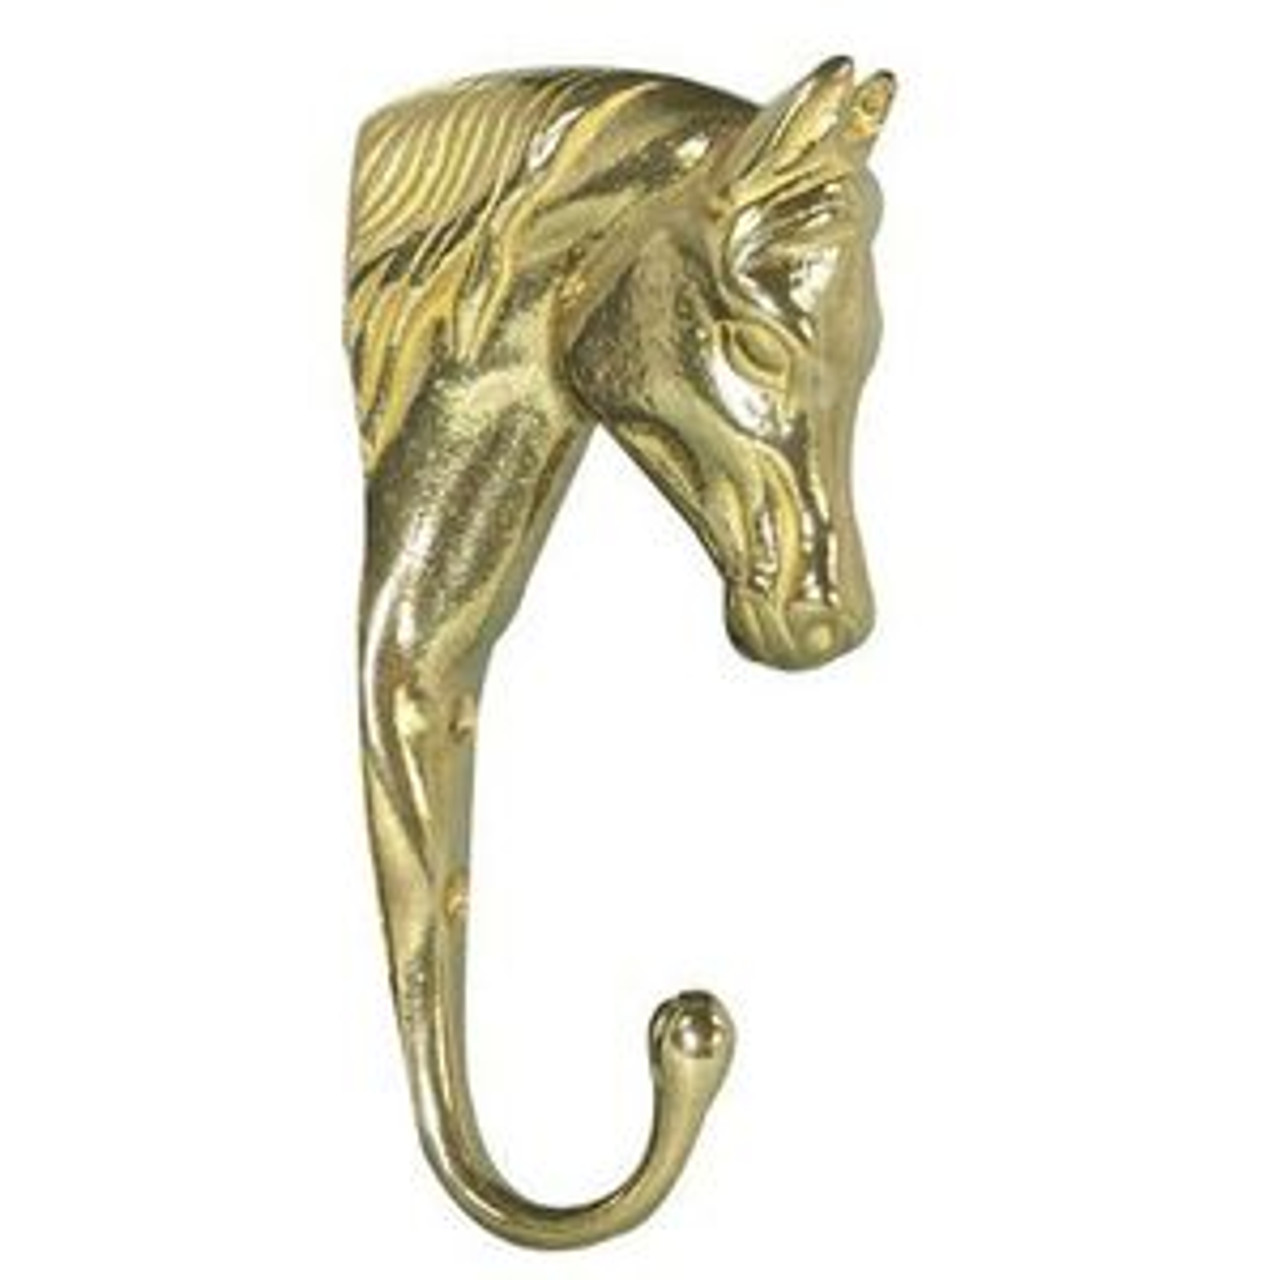 Large Horse Head Hook - Brass — Horse and Hound Gallery